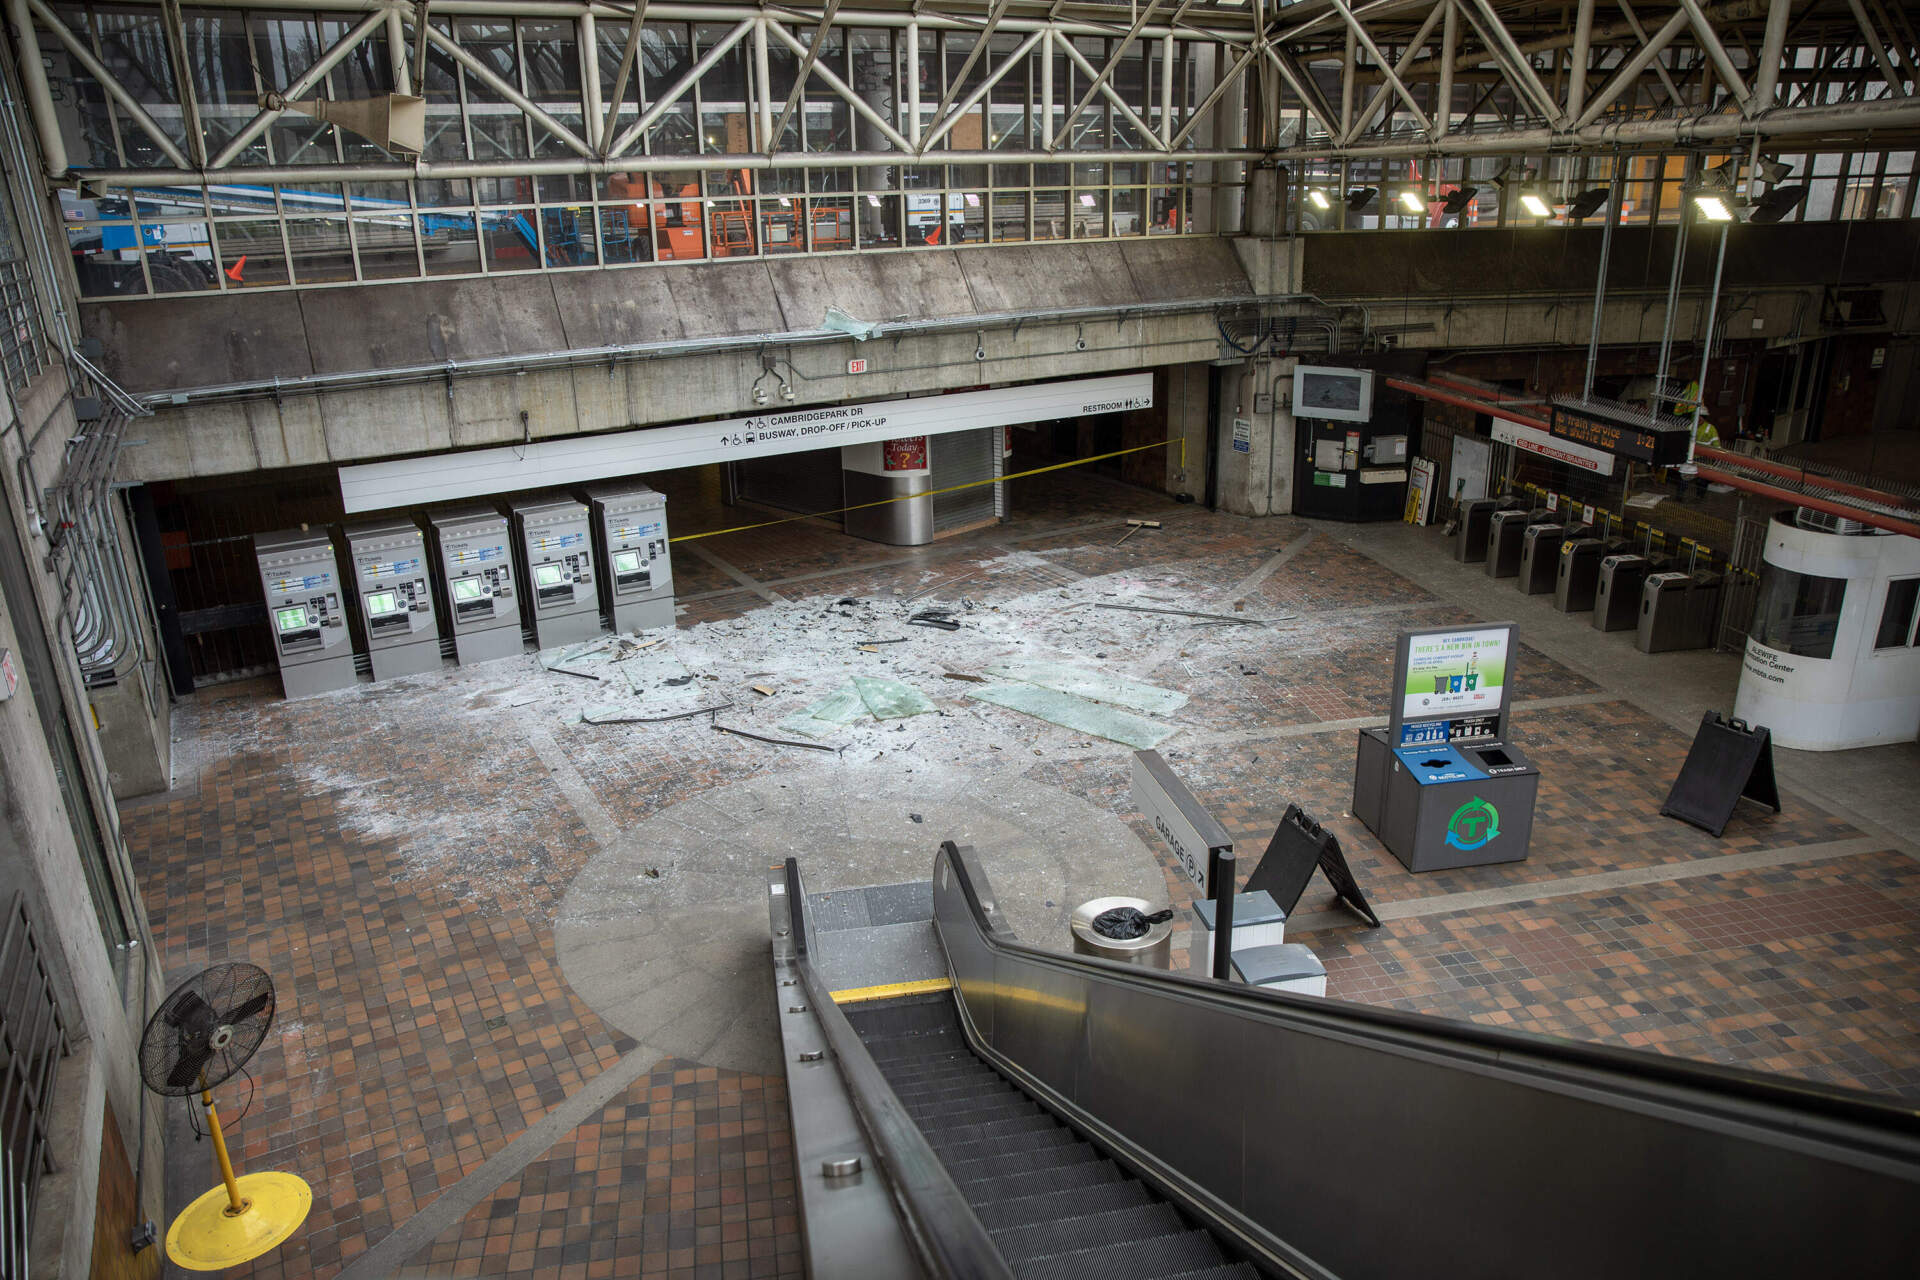 The concourse at Alewife MBTA station, with the floor covered in broken glass, after a driver crashed into a car park wall causing it to fall onto the station atrium. (Robin Lubbock/WBUR)